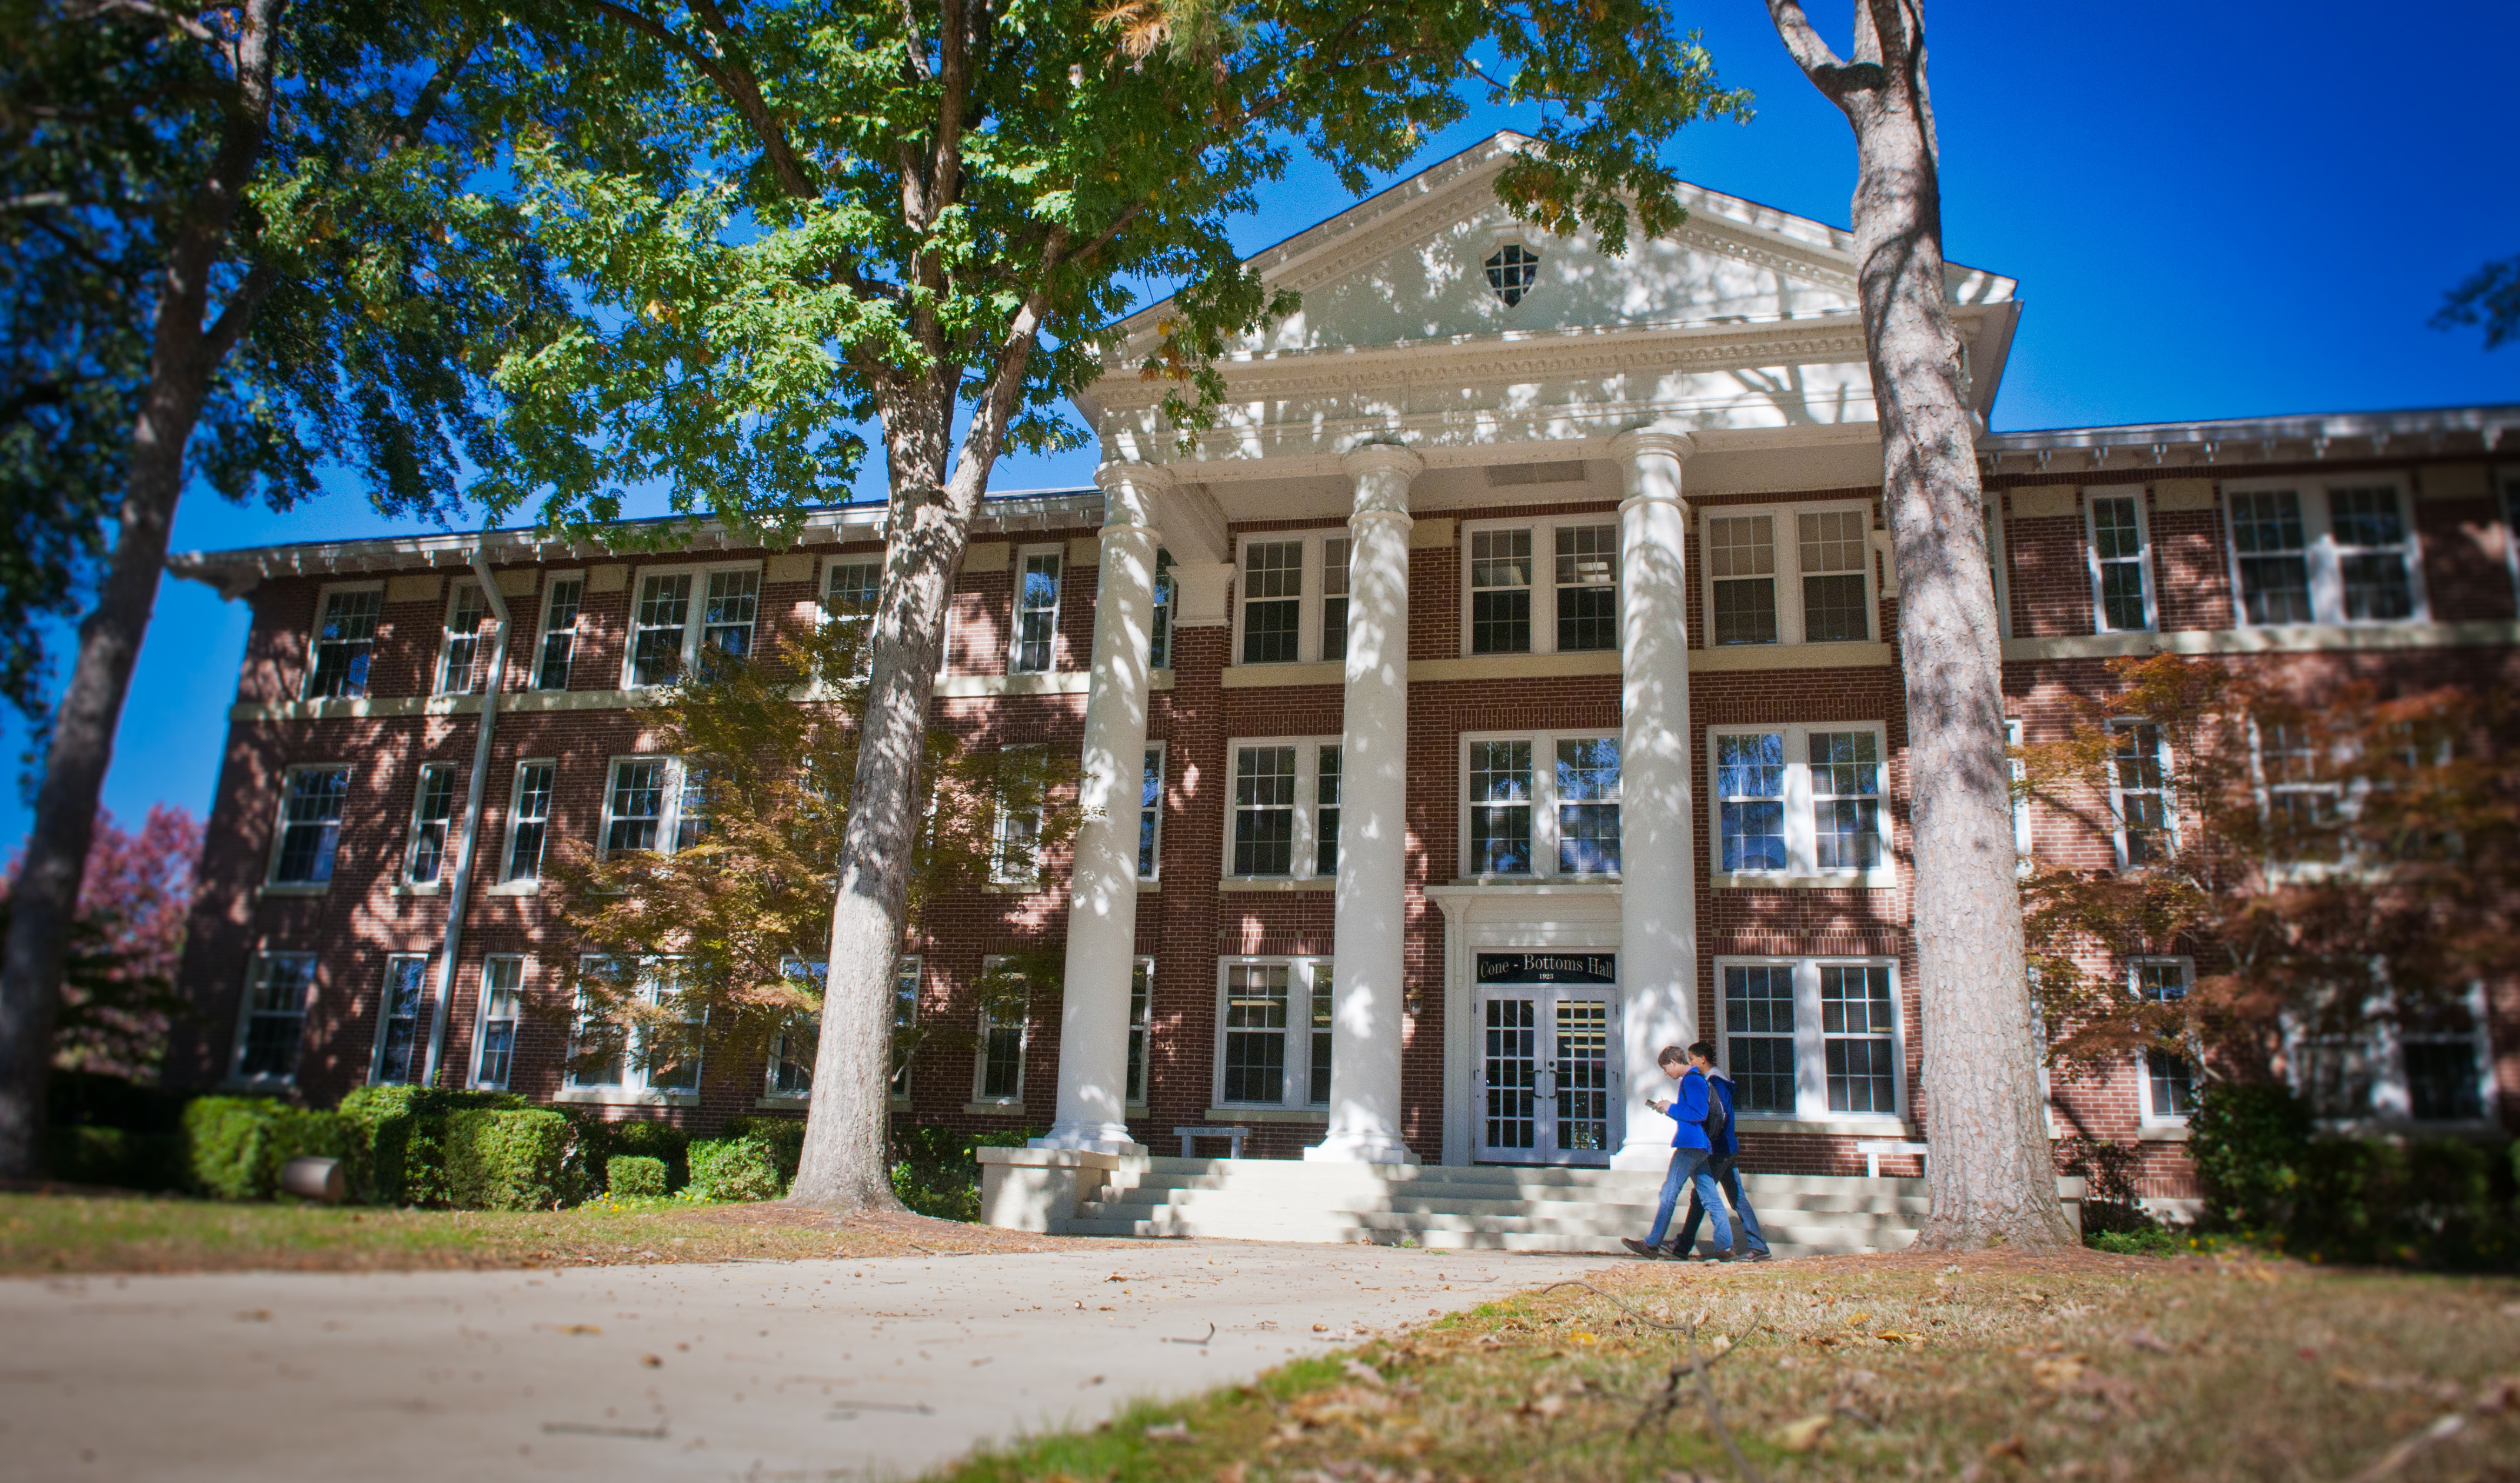 Ouachita earns top tier academic rankings from “Forbes,” “U.S. News” and “USAToday."